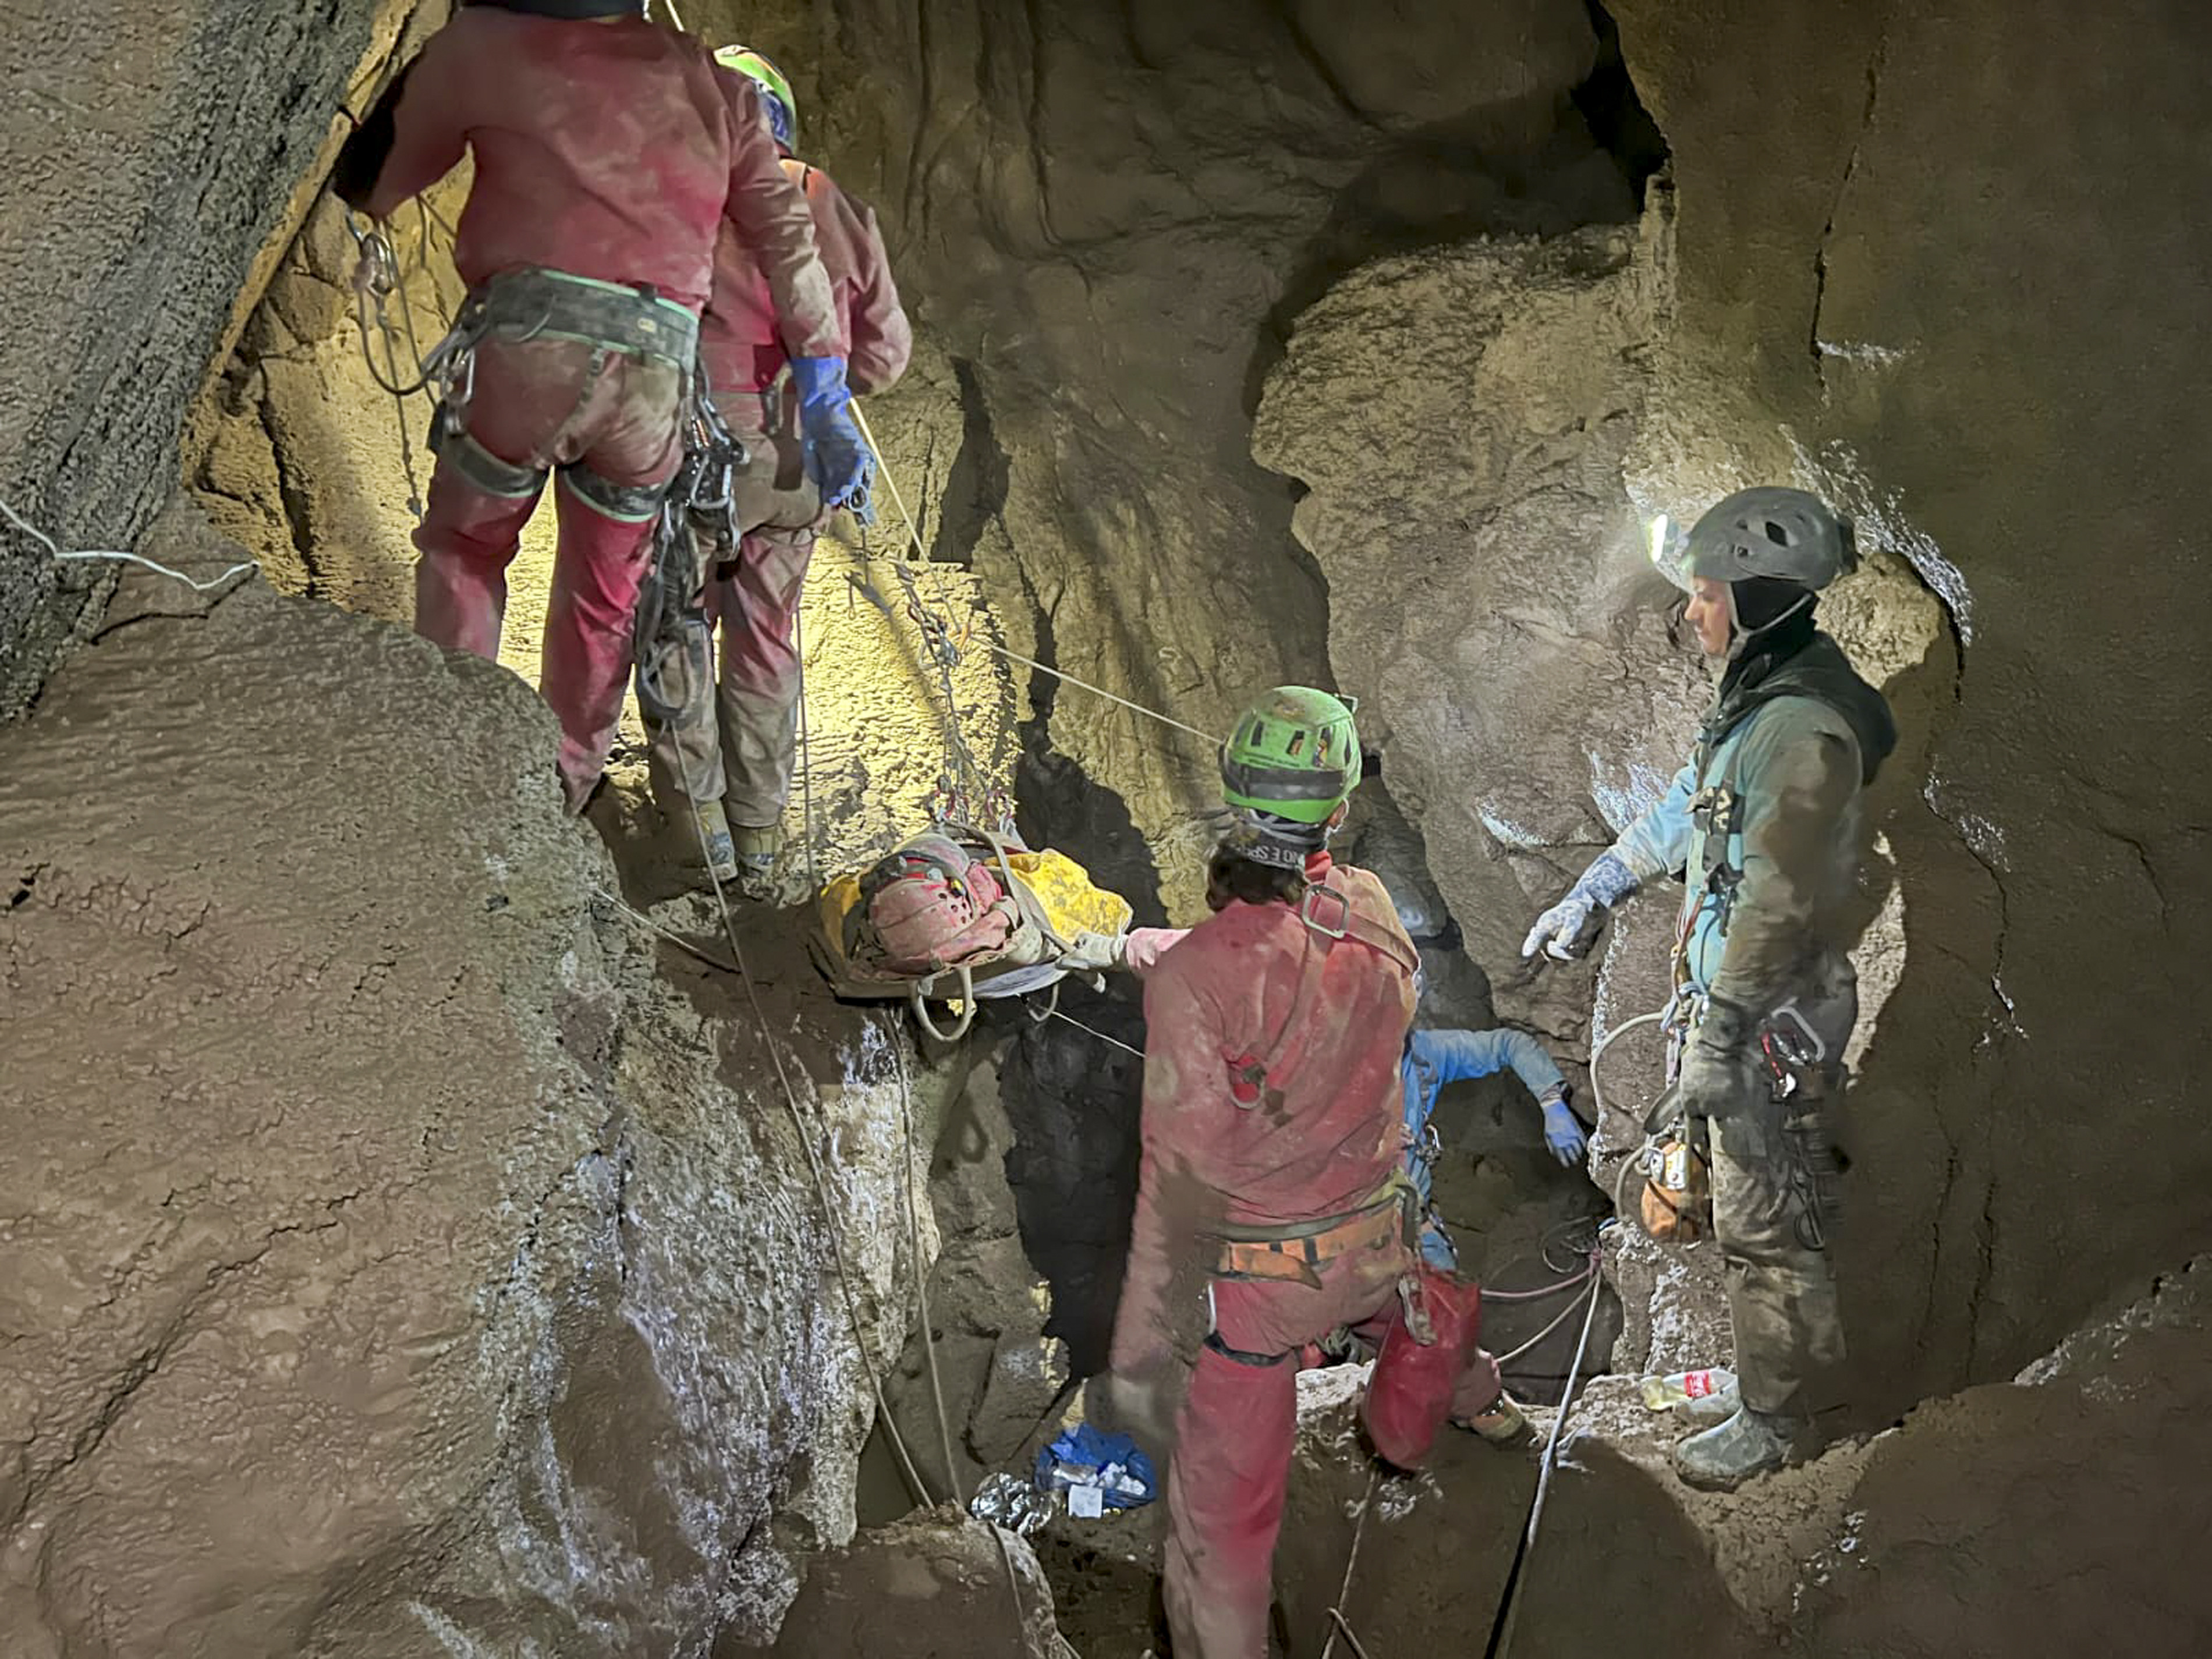 Members of the CNSAS, Italian alpine and speleological rescuers, carry a stretcher with American researcher Mark Dickey during a rescue operation in the Morca cave near Anamur, southern Turkey on Monday. Photo: CNSAS via AP